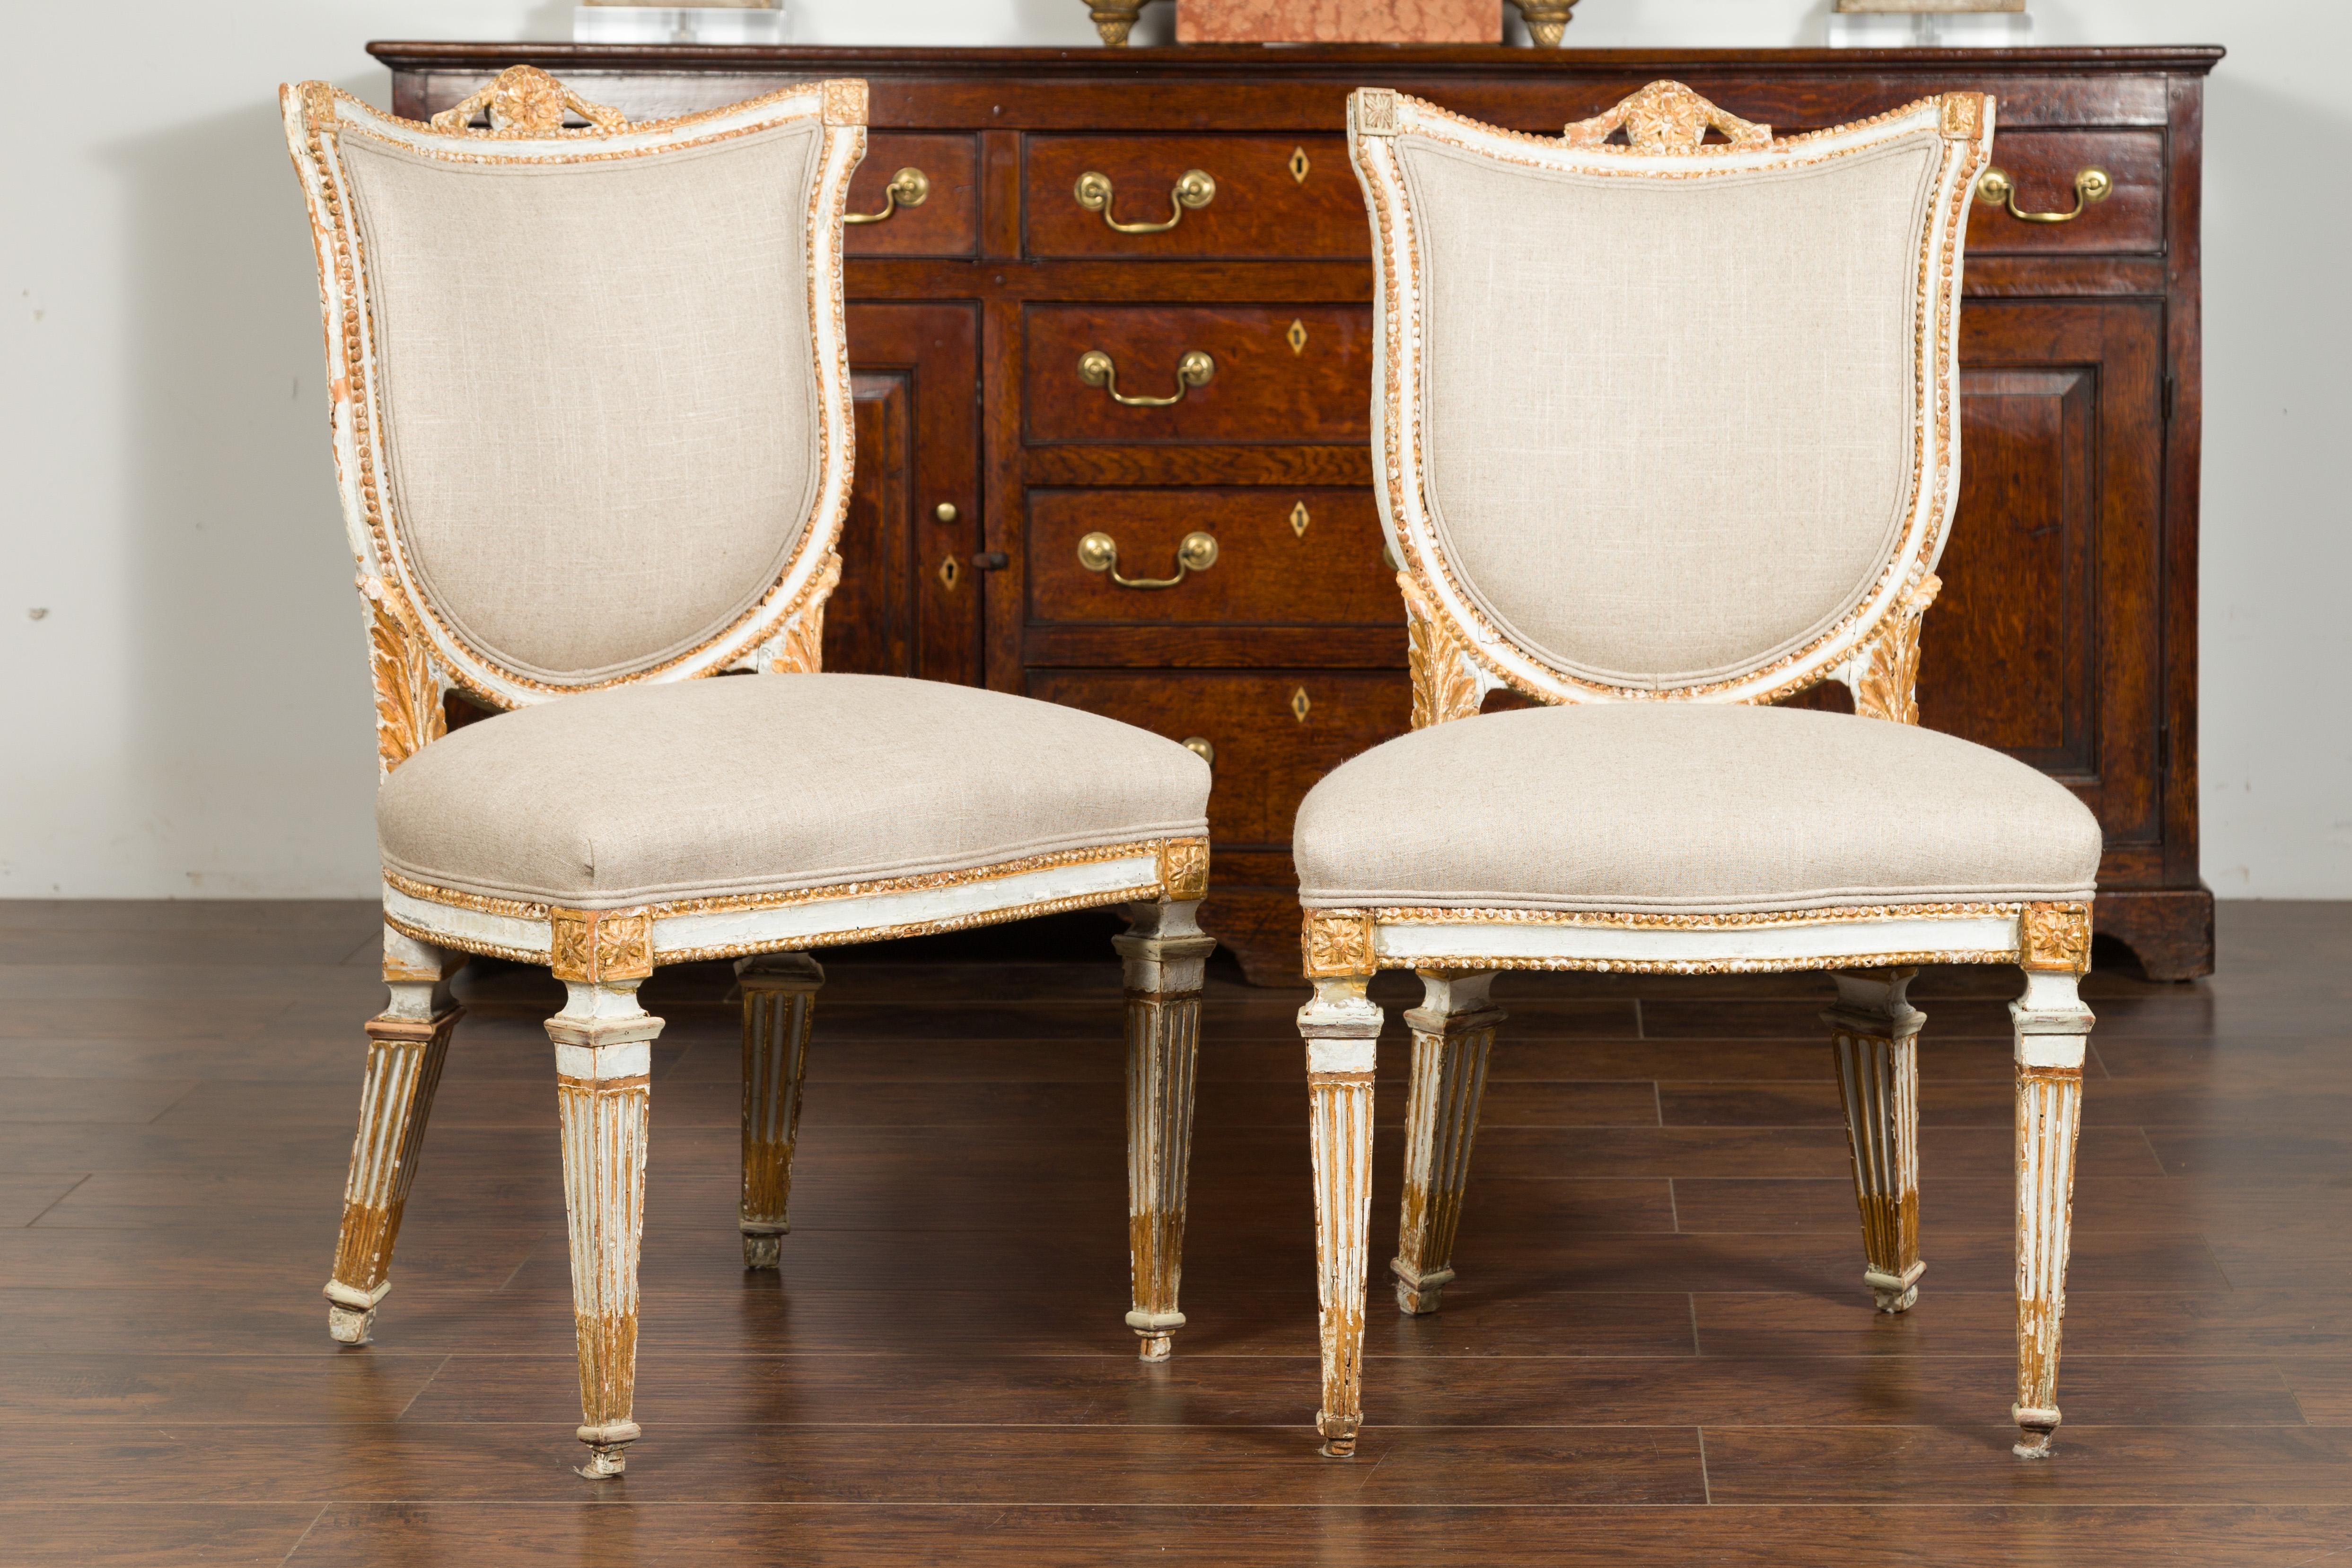 A pair of Italian 1790s neoclassical painted and carved side chairs with shield backs and traces of gilt. This pair of Italian neoclassical side chairs from the late 18th century is quite a show stopper! Each chair has a shield-shaped back, adorned